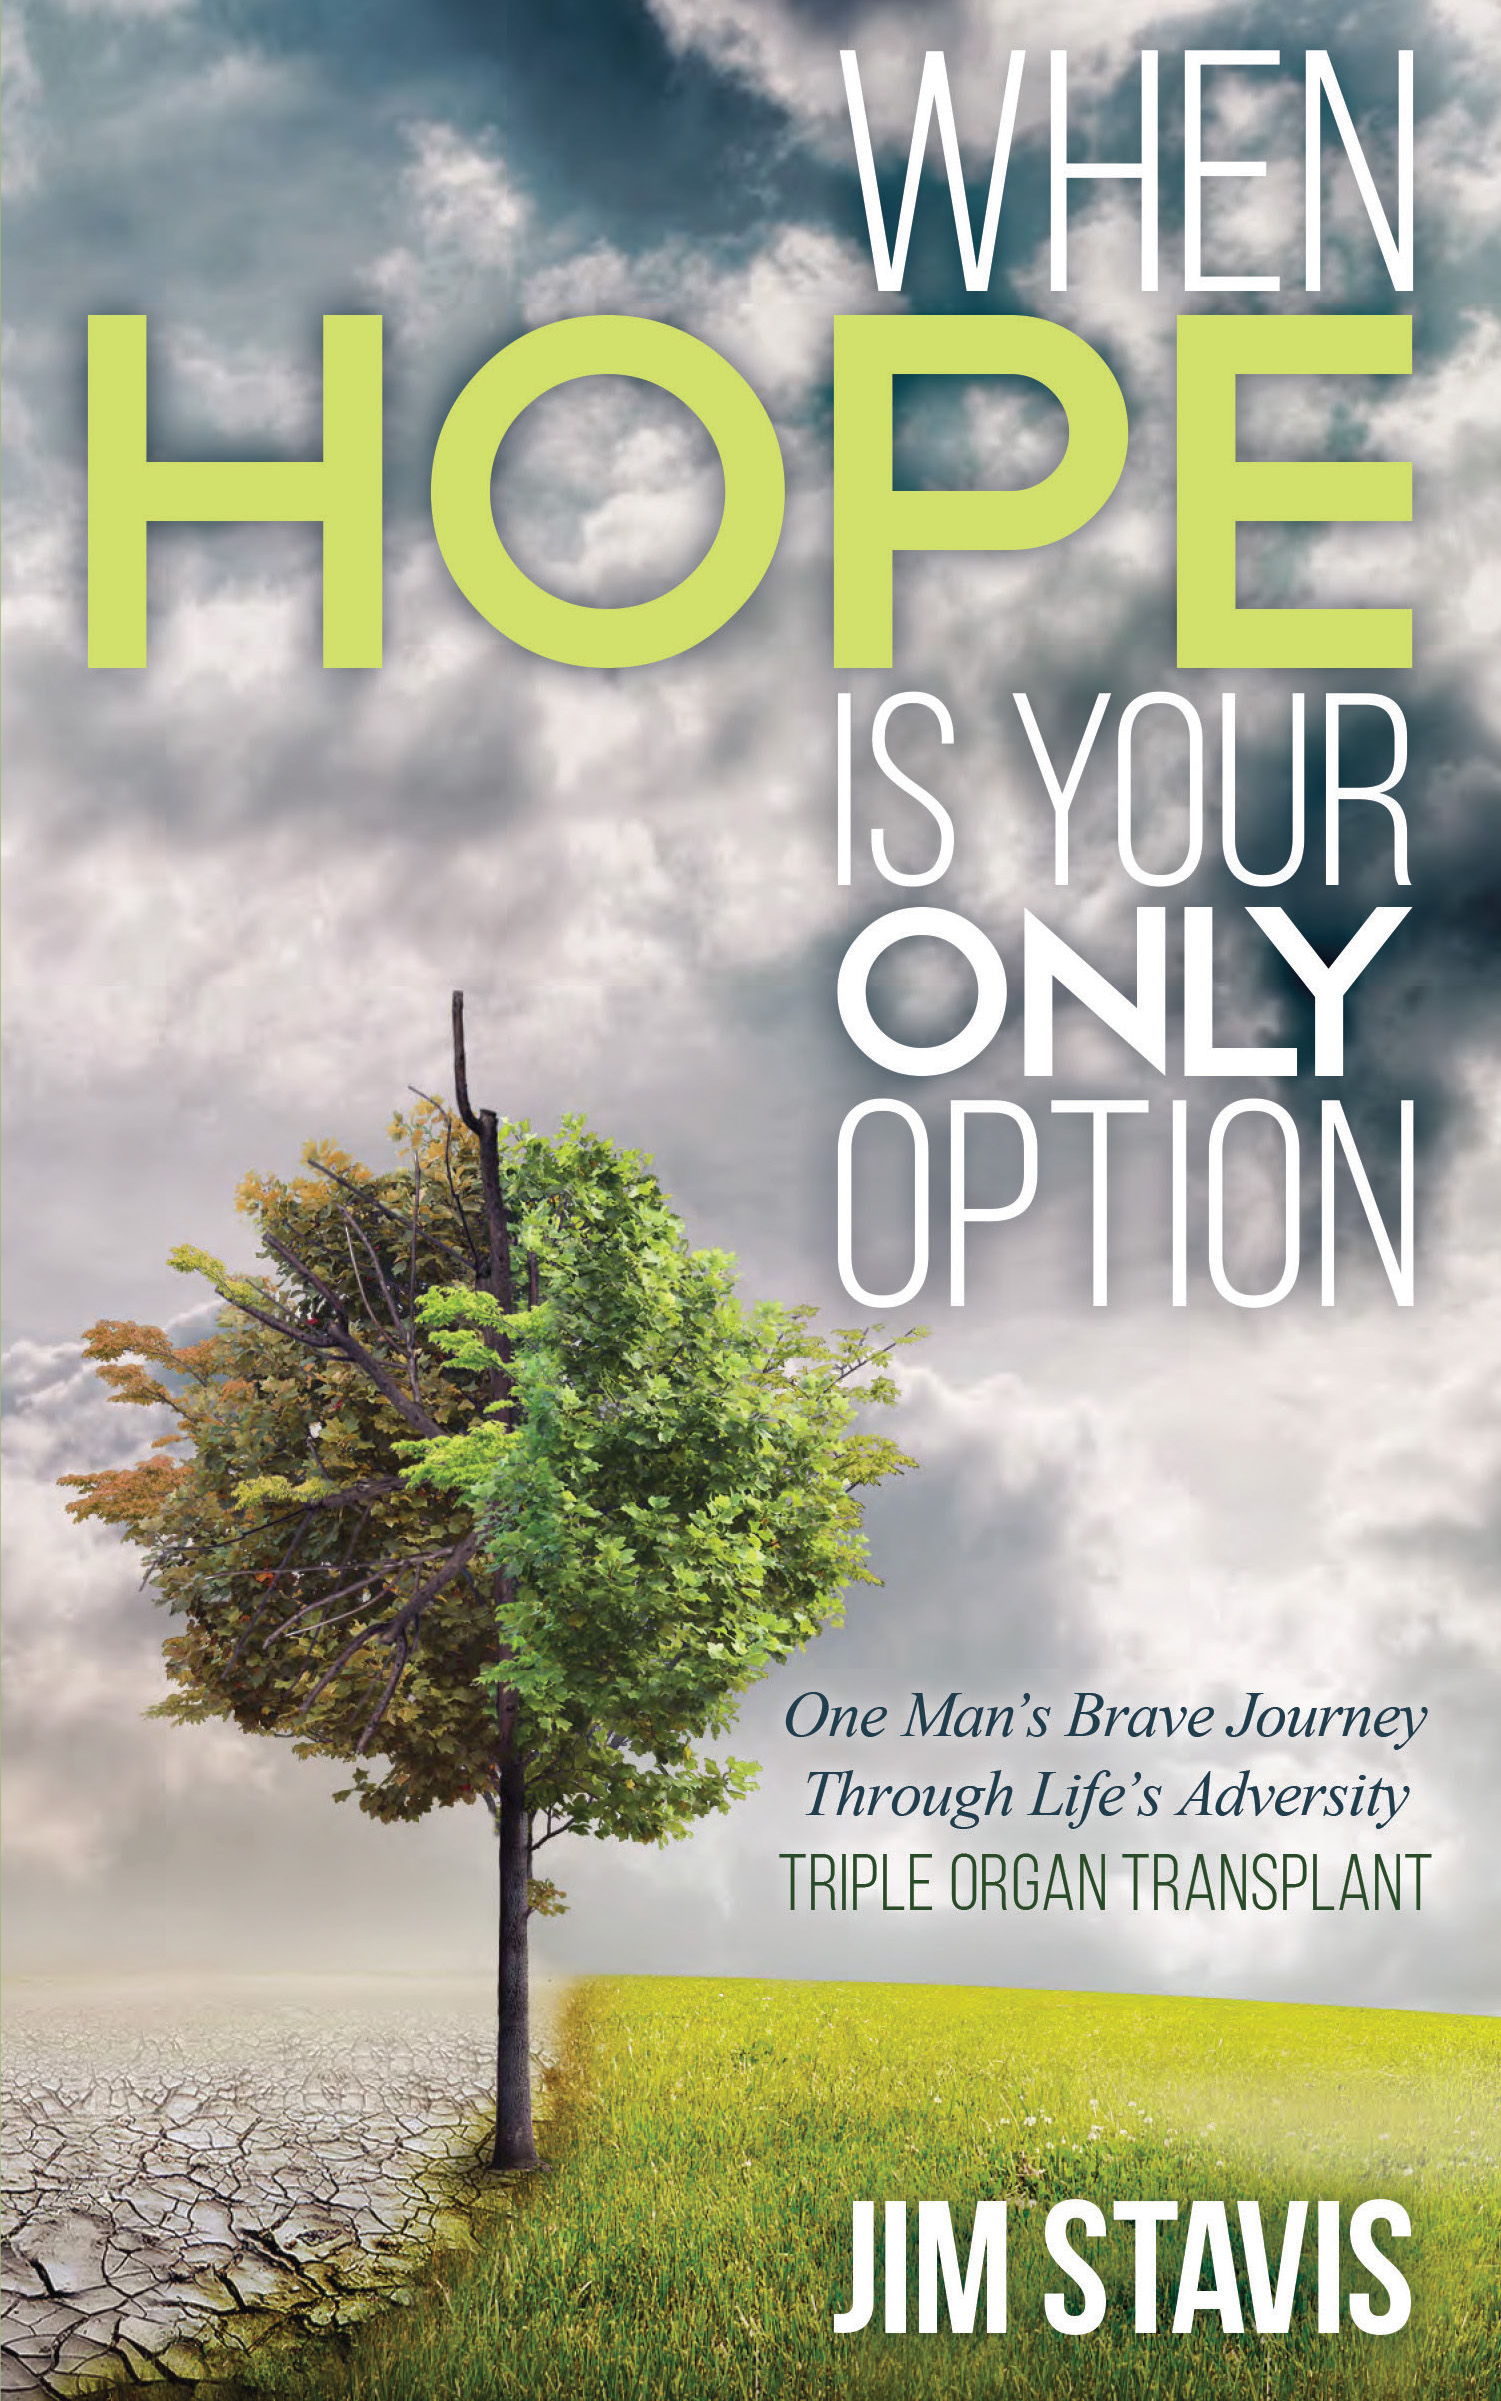 The Hollywood Book Reviews on When Hope is Your Only Option